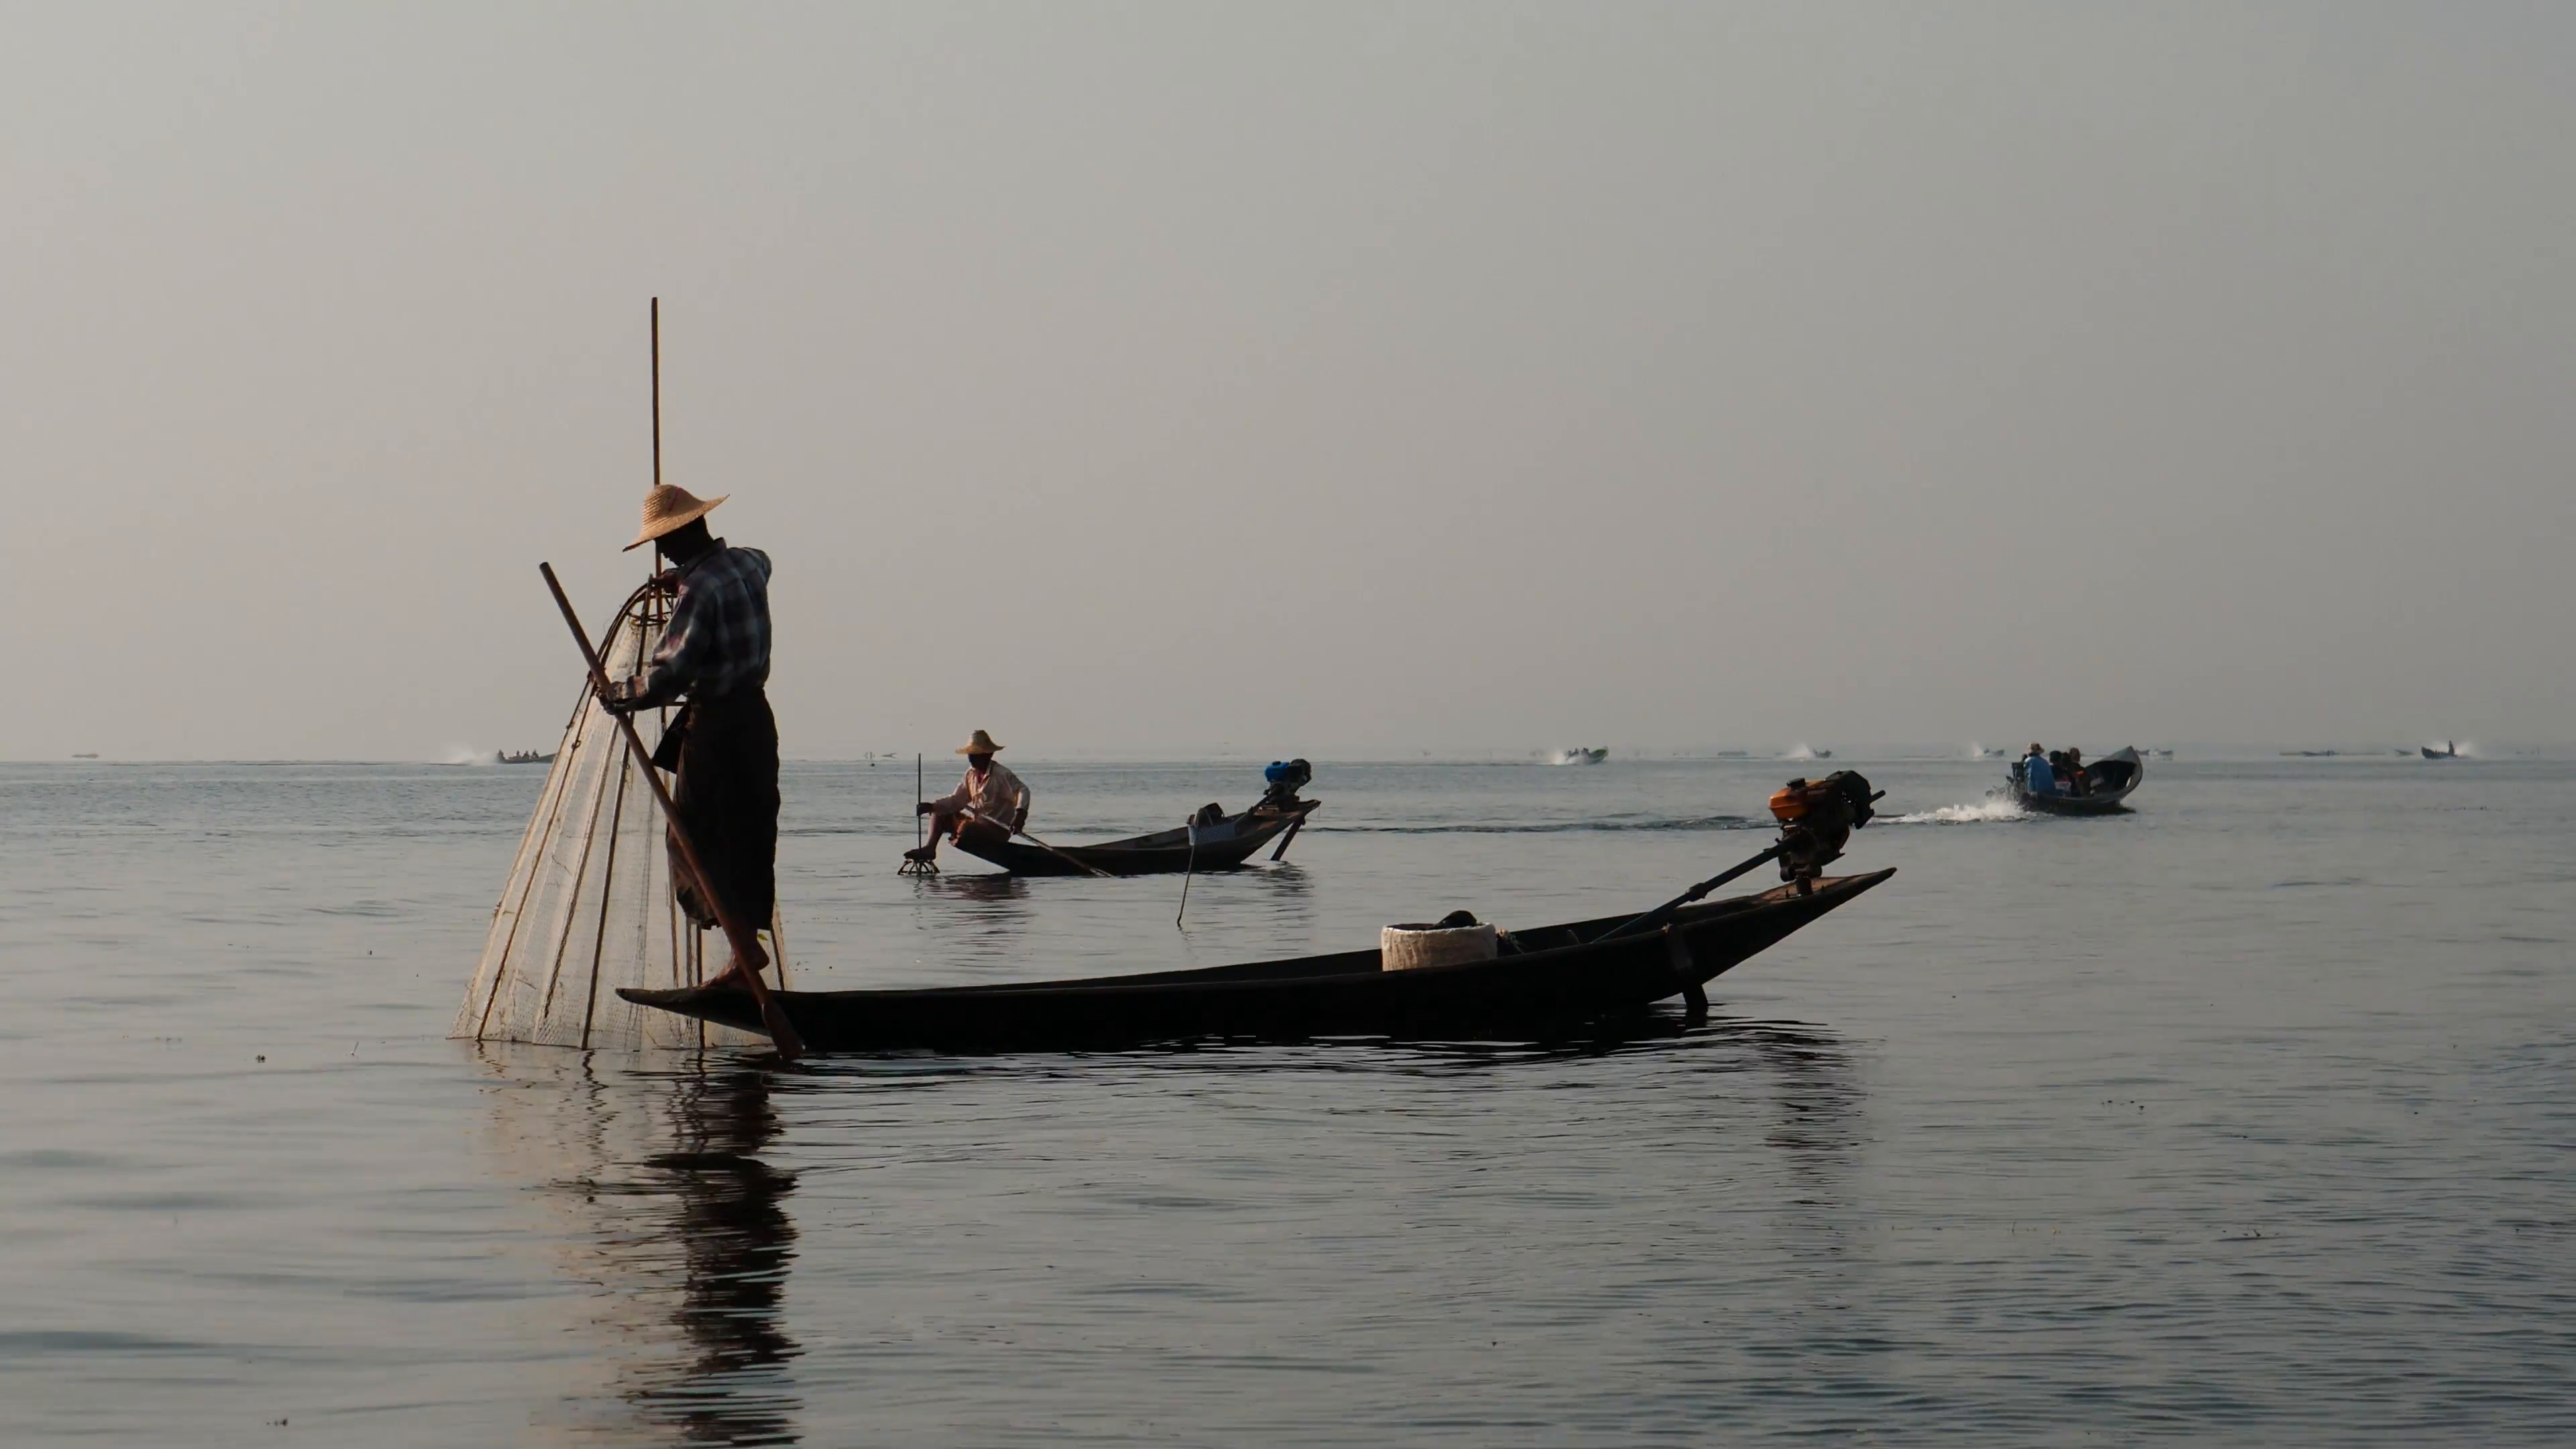 Fishers on boat in waters at Inle lake of Myanmar - view from ...